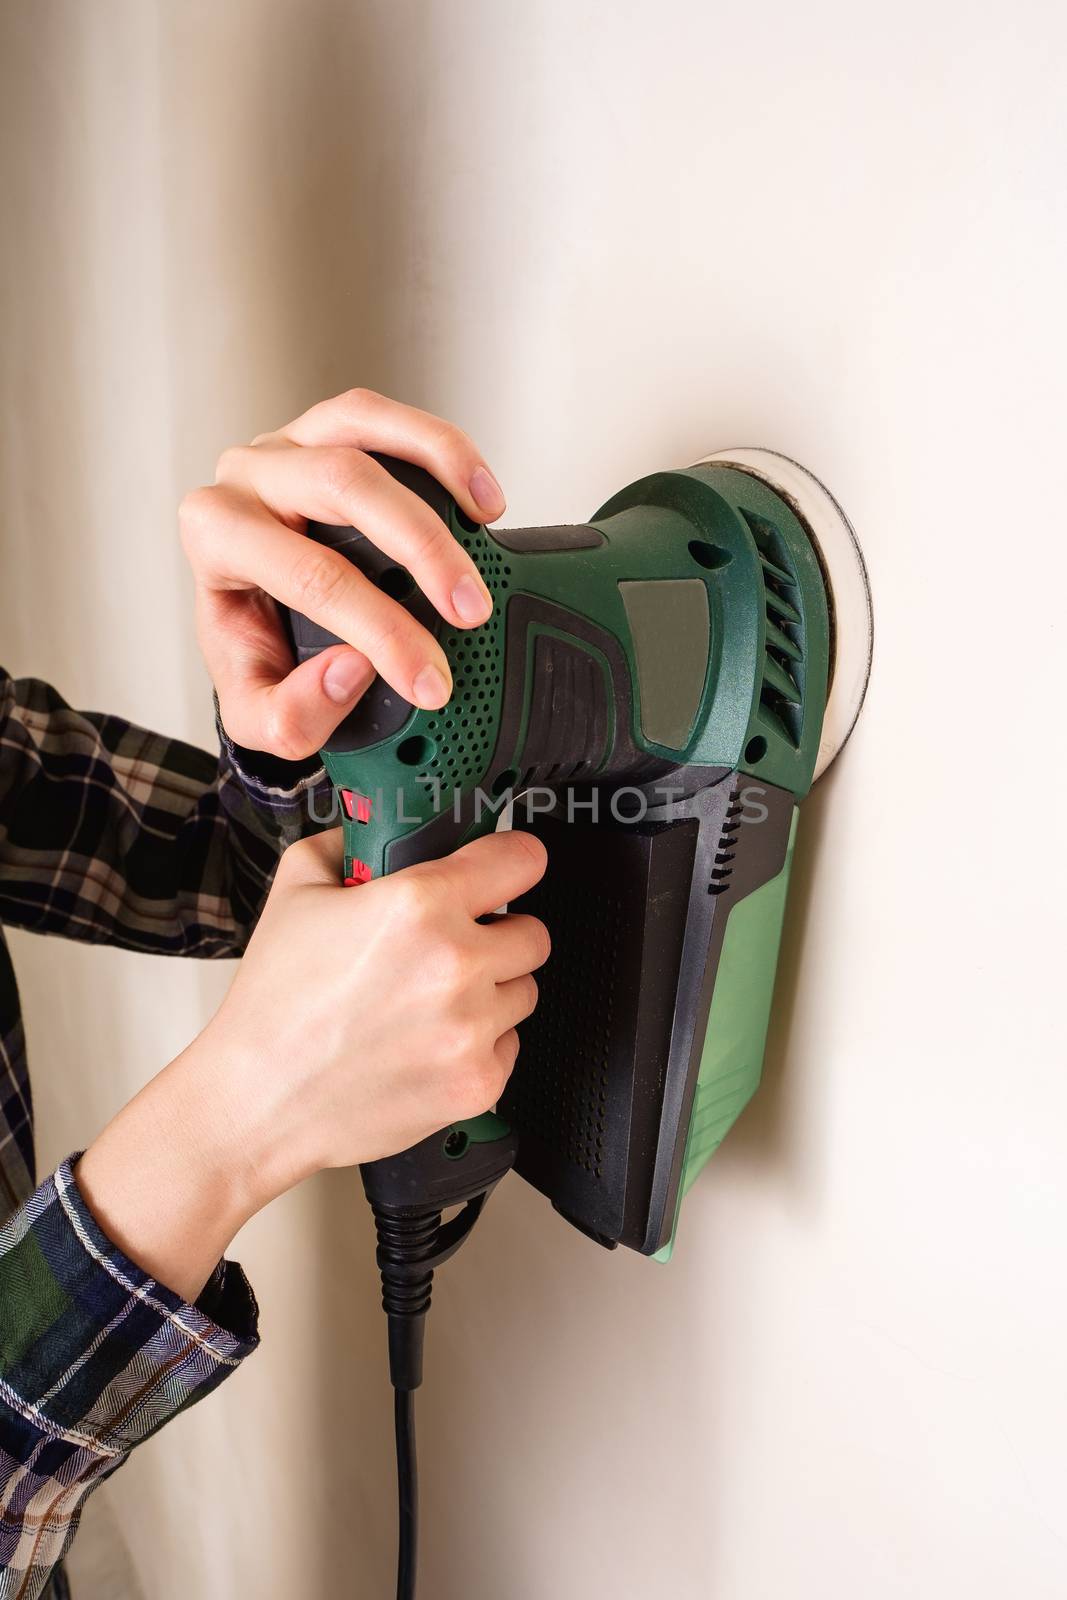 Woman hands holding and working with electric sander to smooth plaster wall surface, room renovation concept